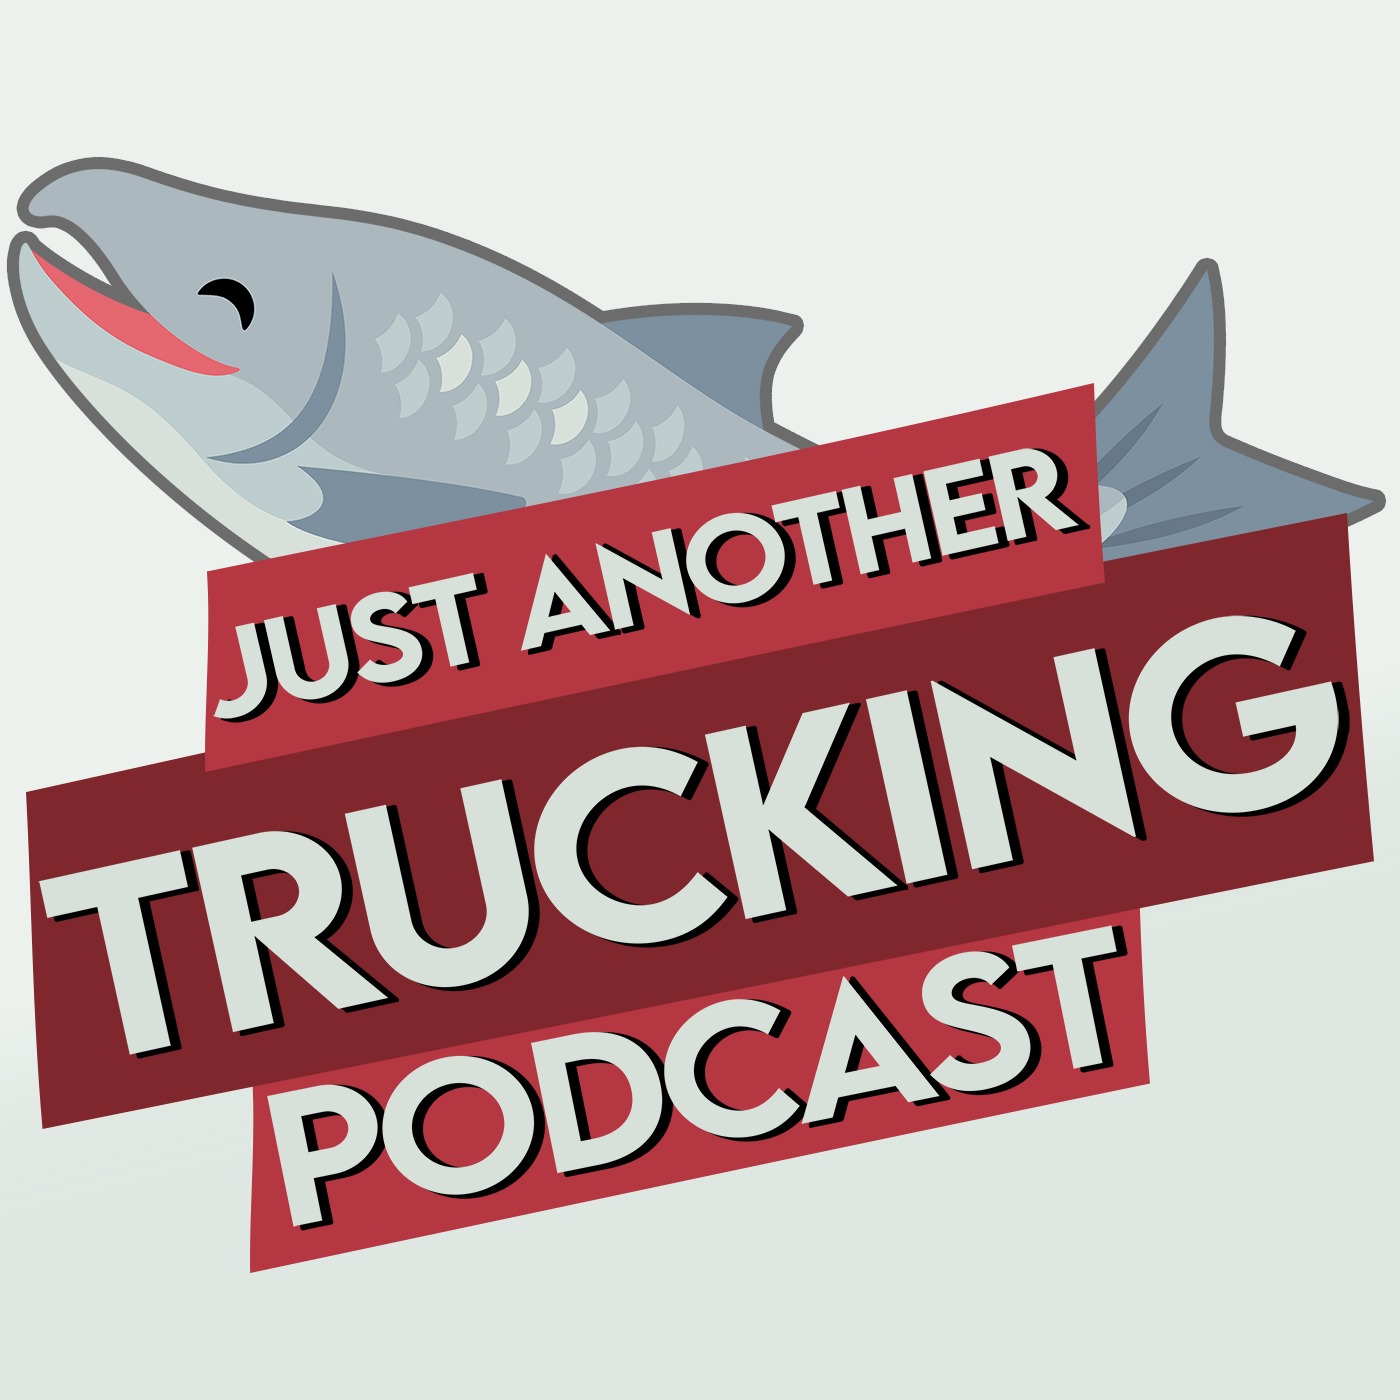 Tom loves his stick | Just another trucking podcast